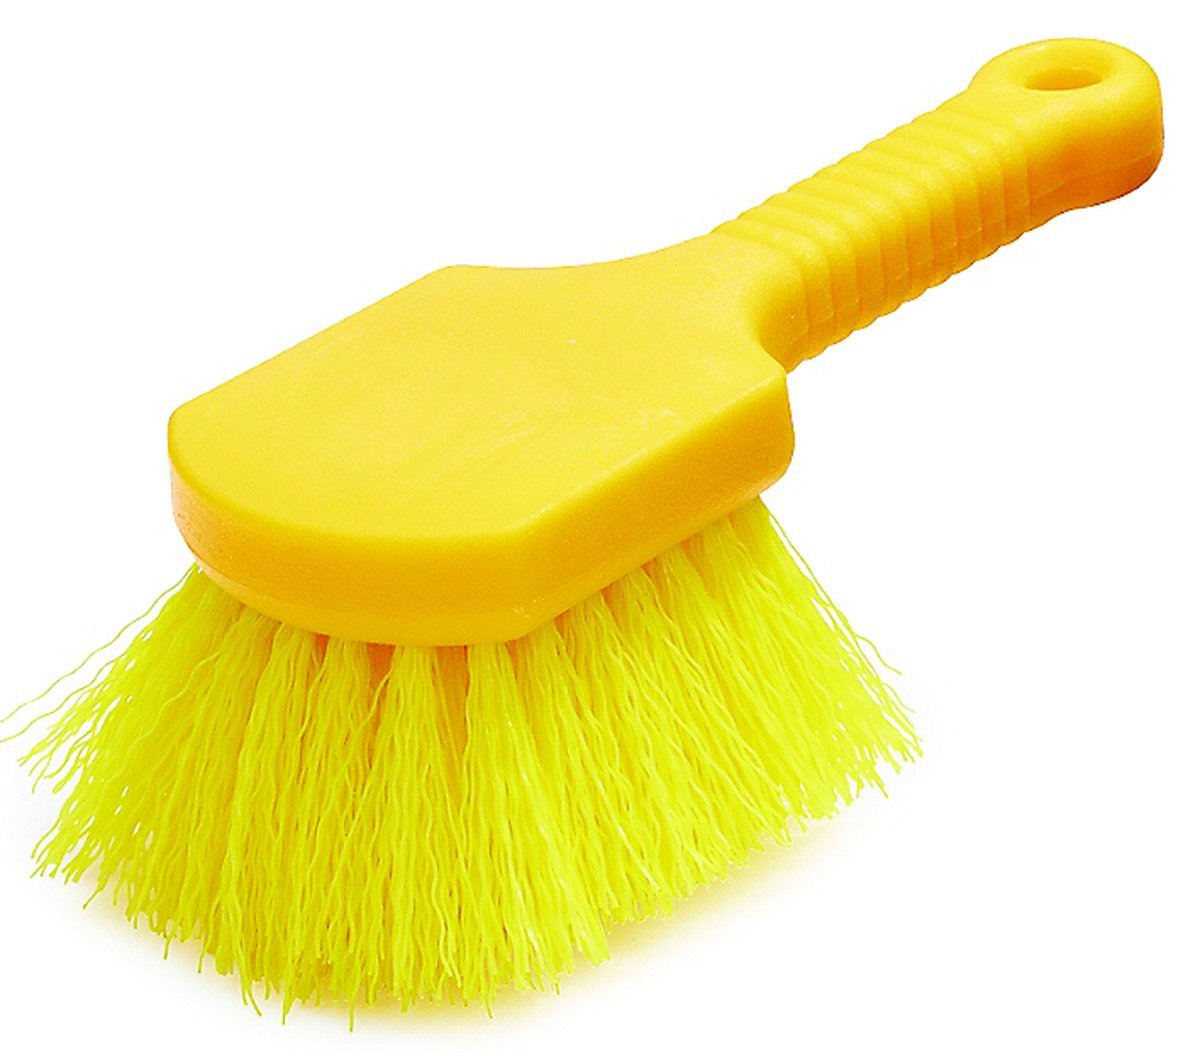 Rubbermaid Commercial 9B29 Pot Scrubber Brush, 8 Plastic Handle, Gray Handle w/Yellow Bristles - image 2 of 3